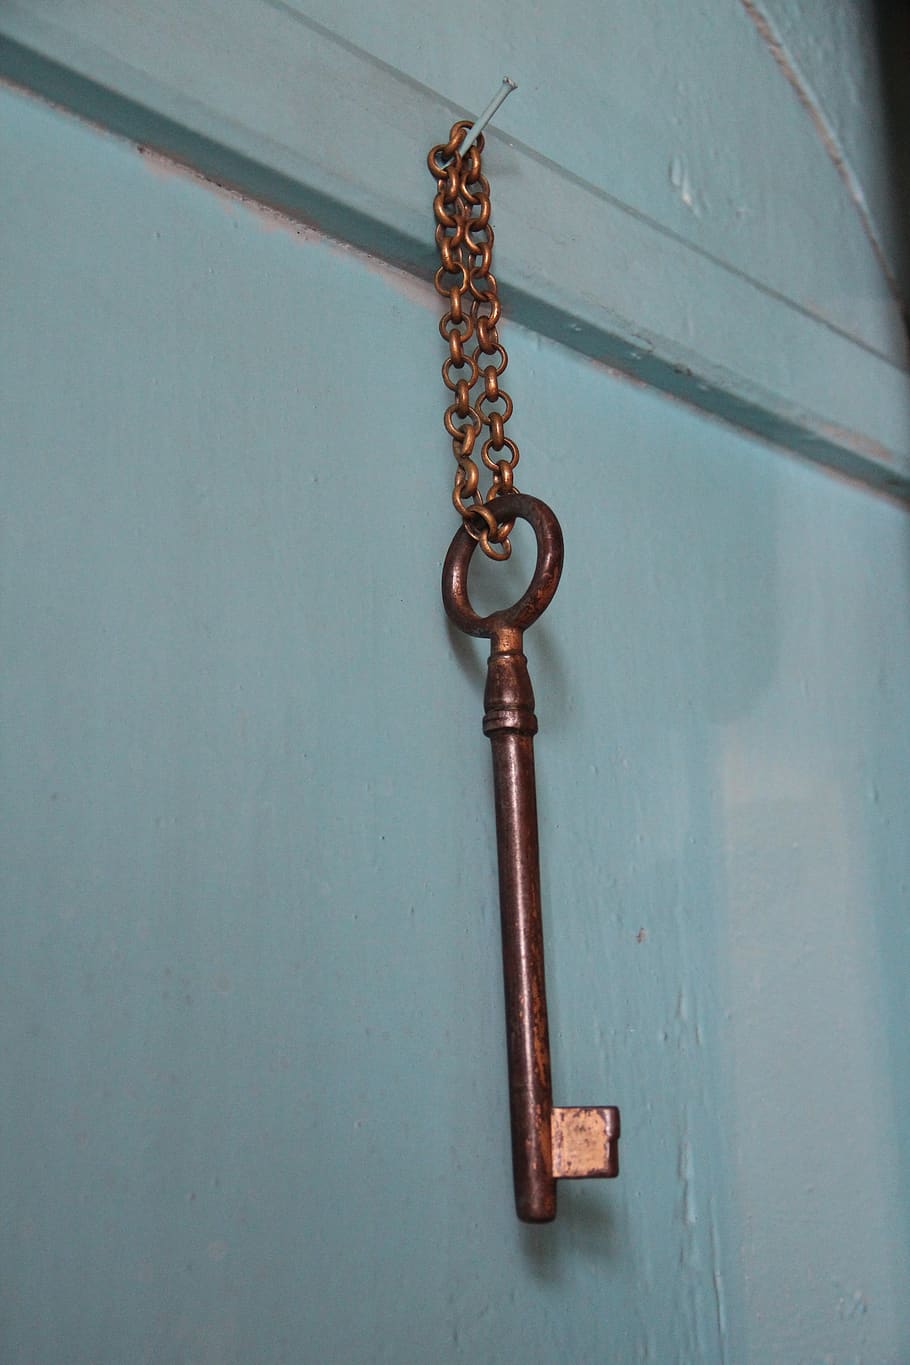 key, the key on the door, key chain, metal, close-up, indoors, chain, hanging, safety, wood - material